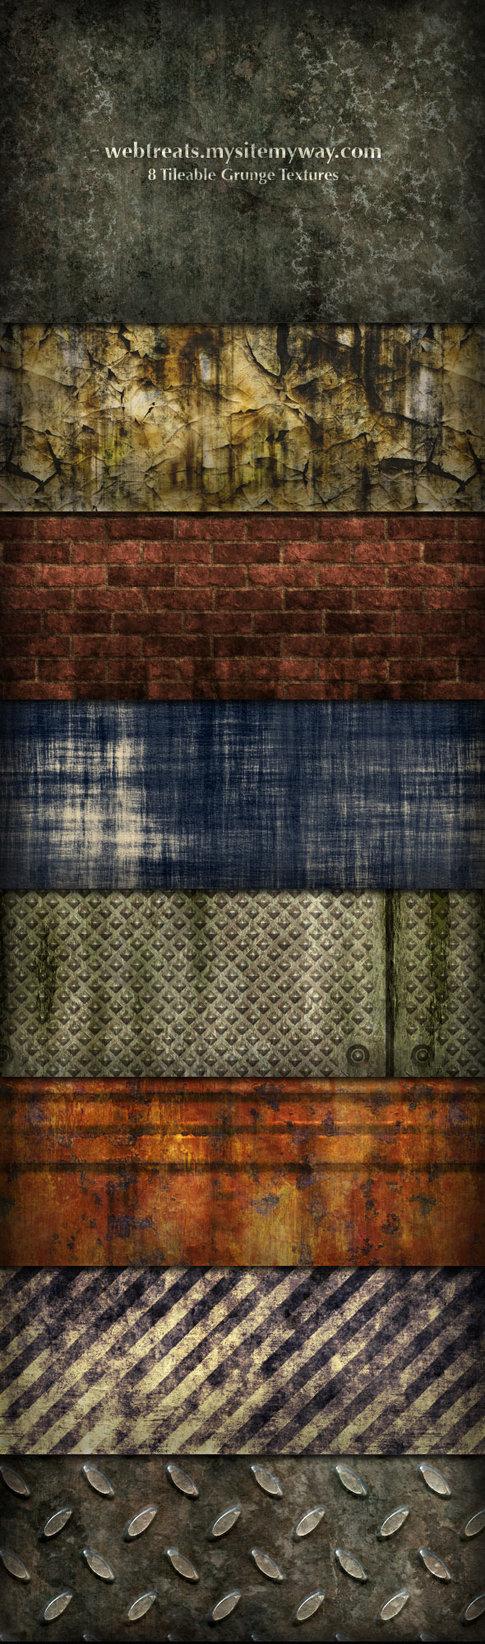 Grunge Textures and Patterns by WebTreatsETC photoshop resource collected by psd-dude.com from deviantart